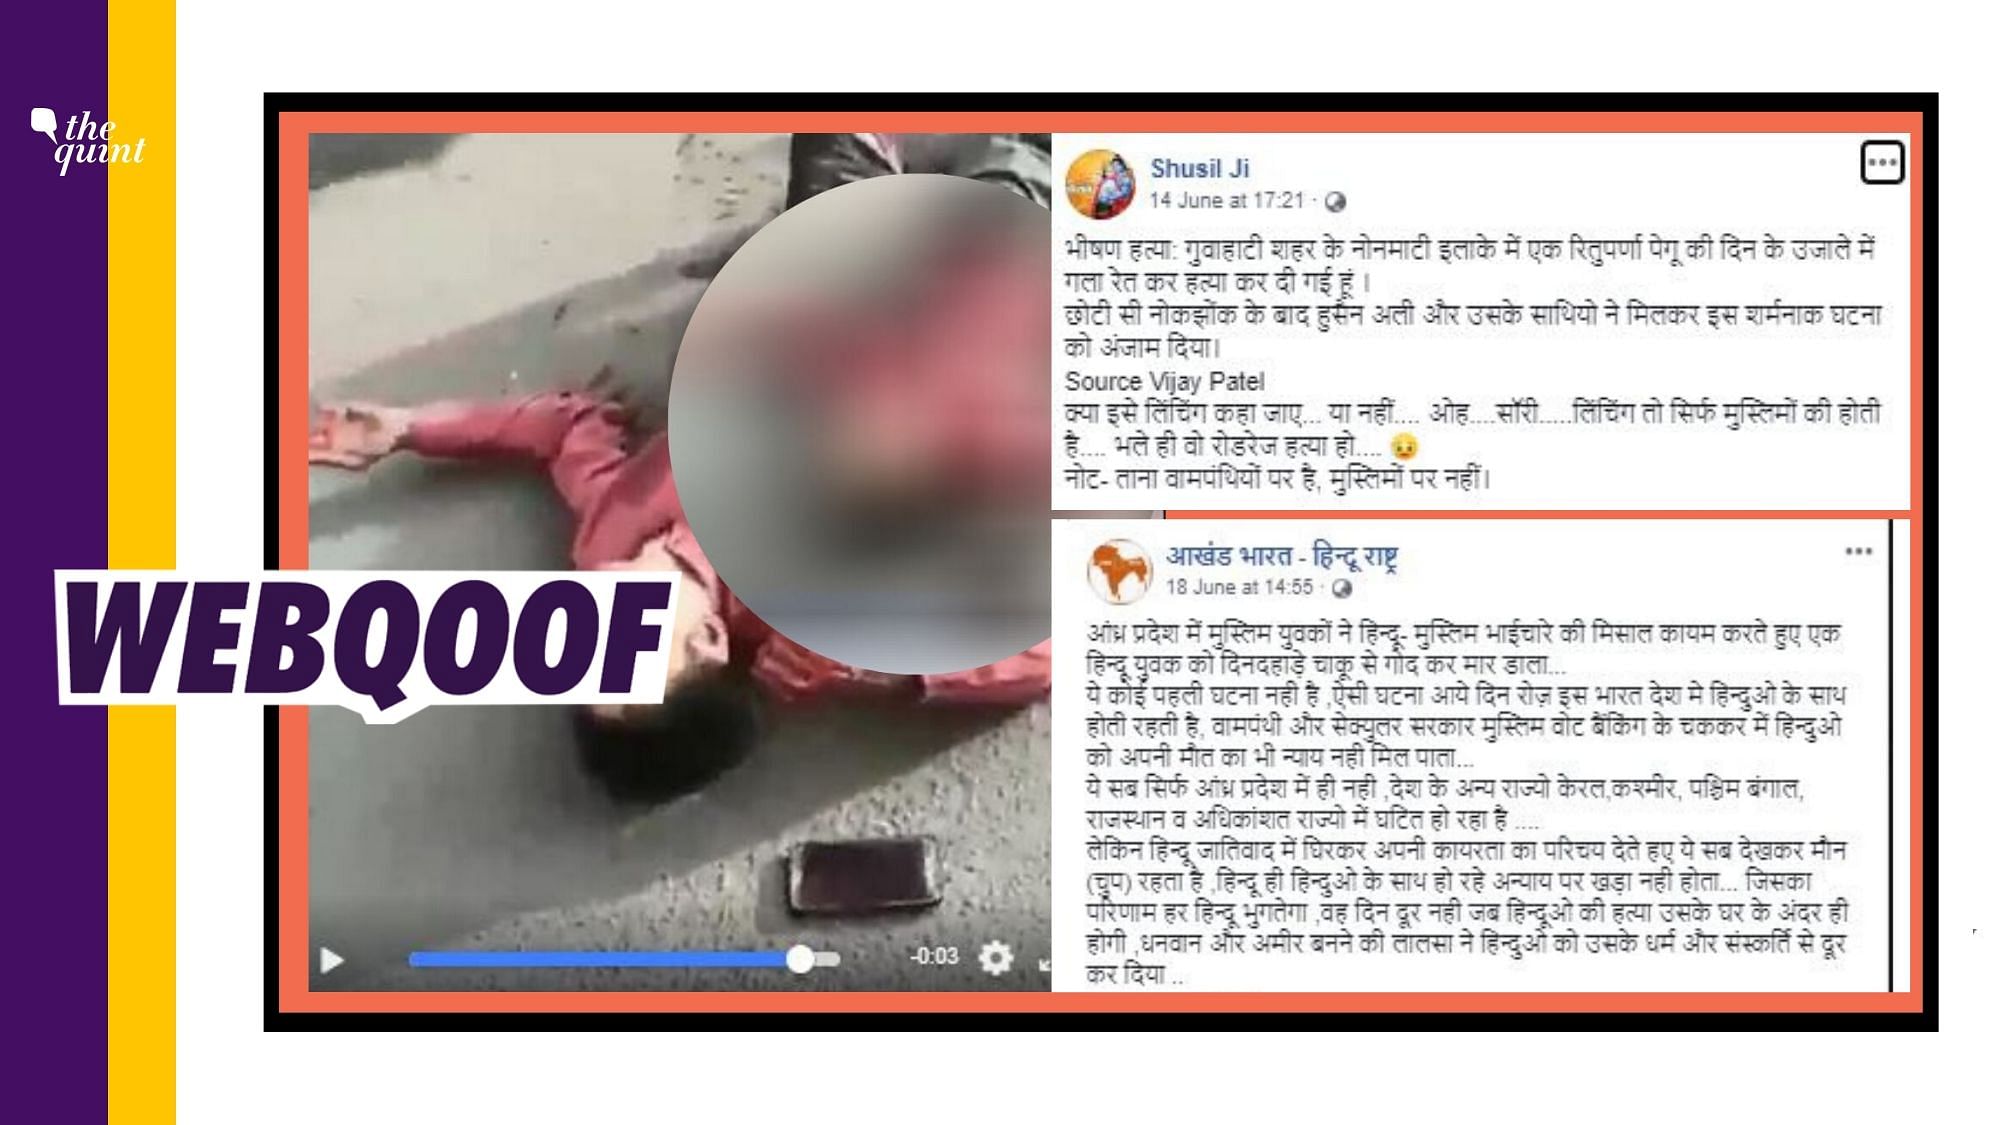 A viral video on various social media platforms is being shared with a claim that it shows a Hindu youth who was murdered in broad daylight.